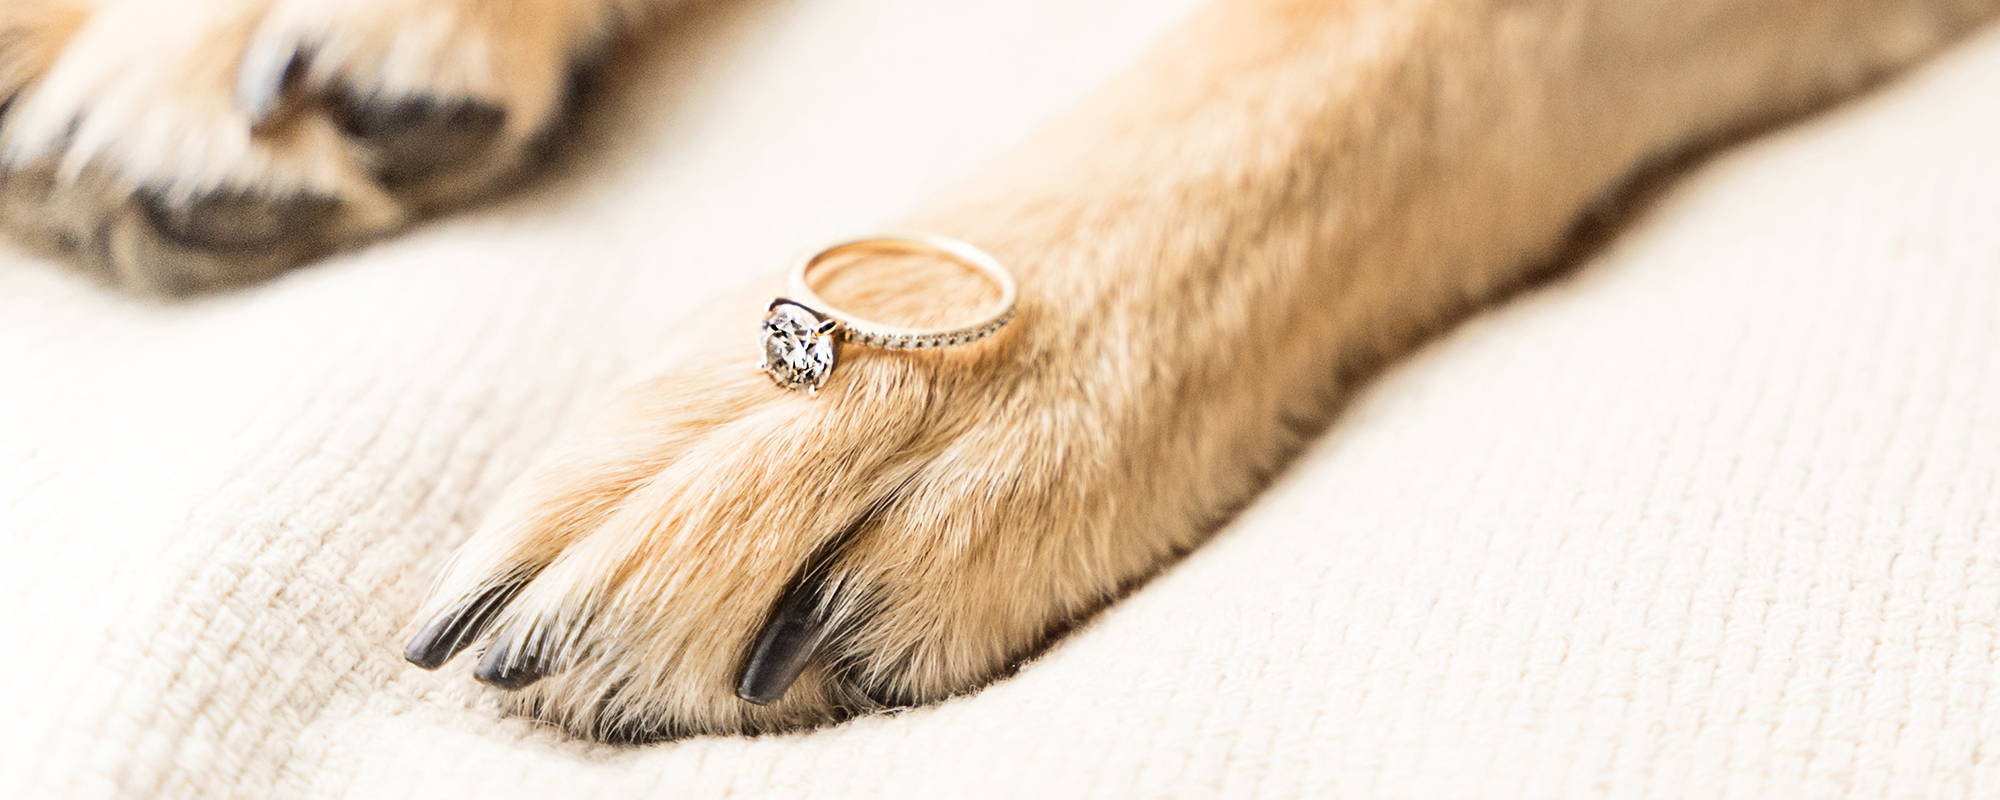 8 Ways You Can Include Pets in Your Wedding